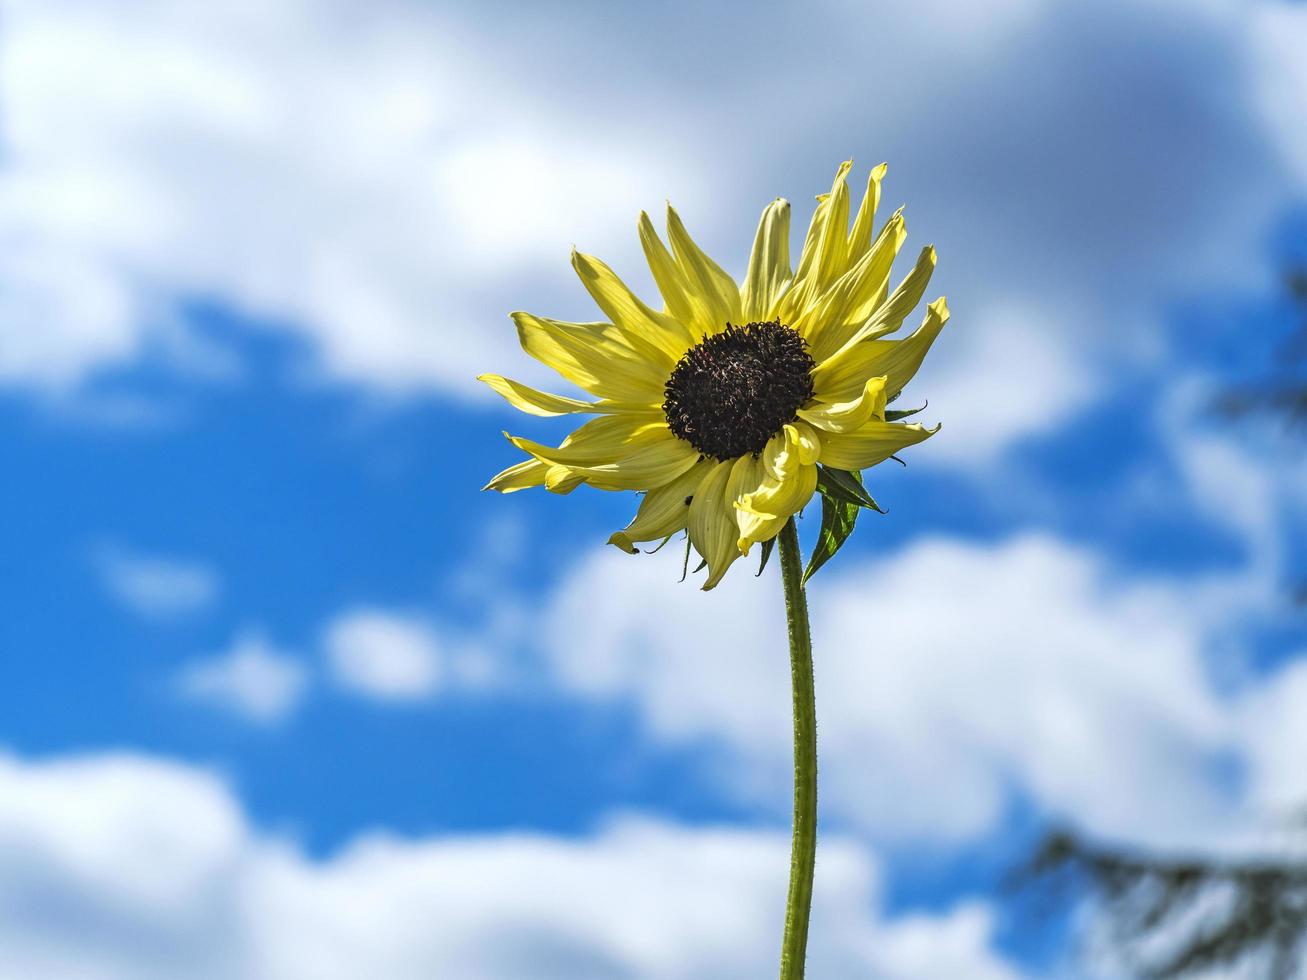 Narrow leaved sunflower and a cloudy blue summer sky photo